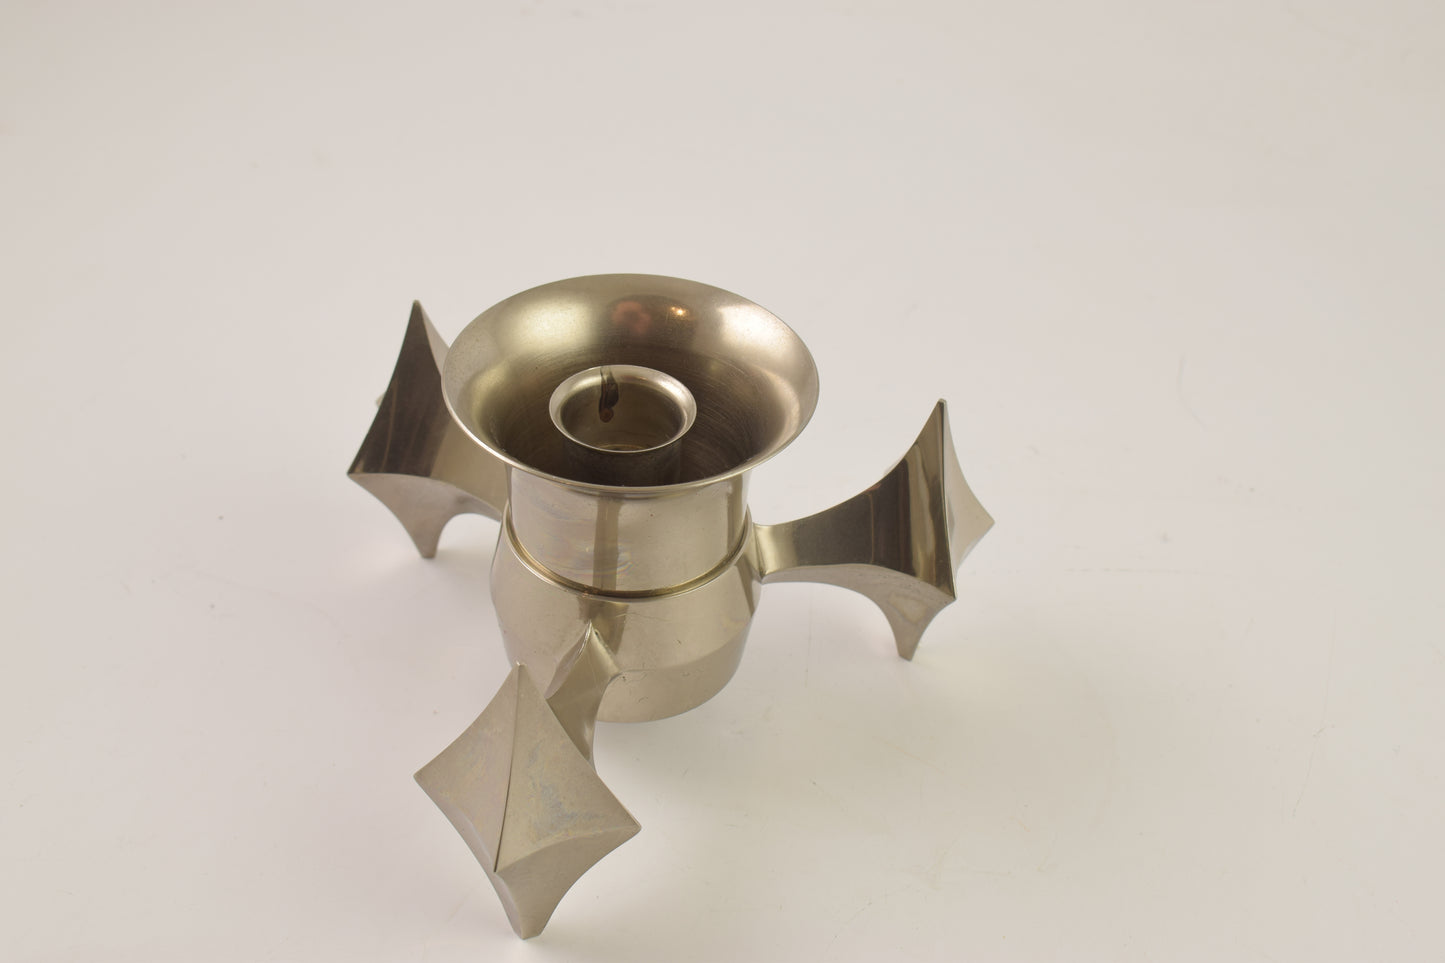 Very rare big vintage nagel quist Candle holder real space age design